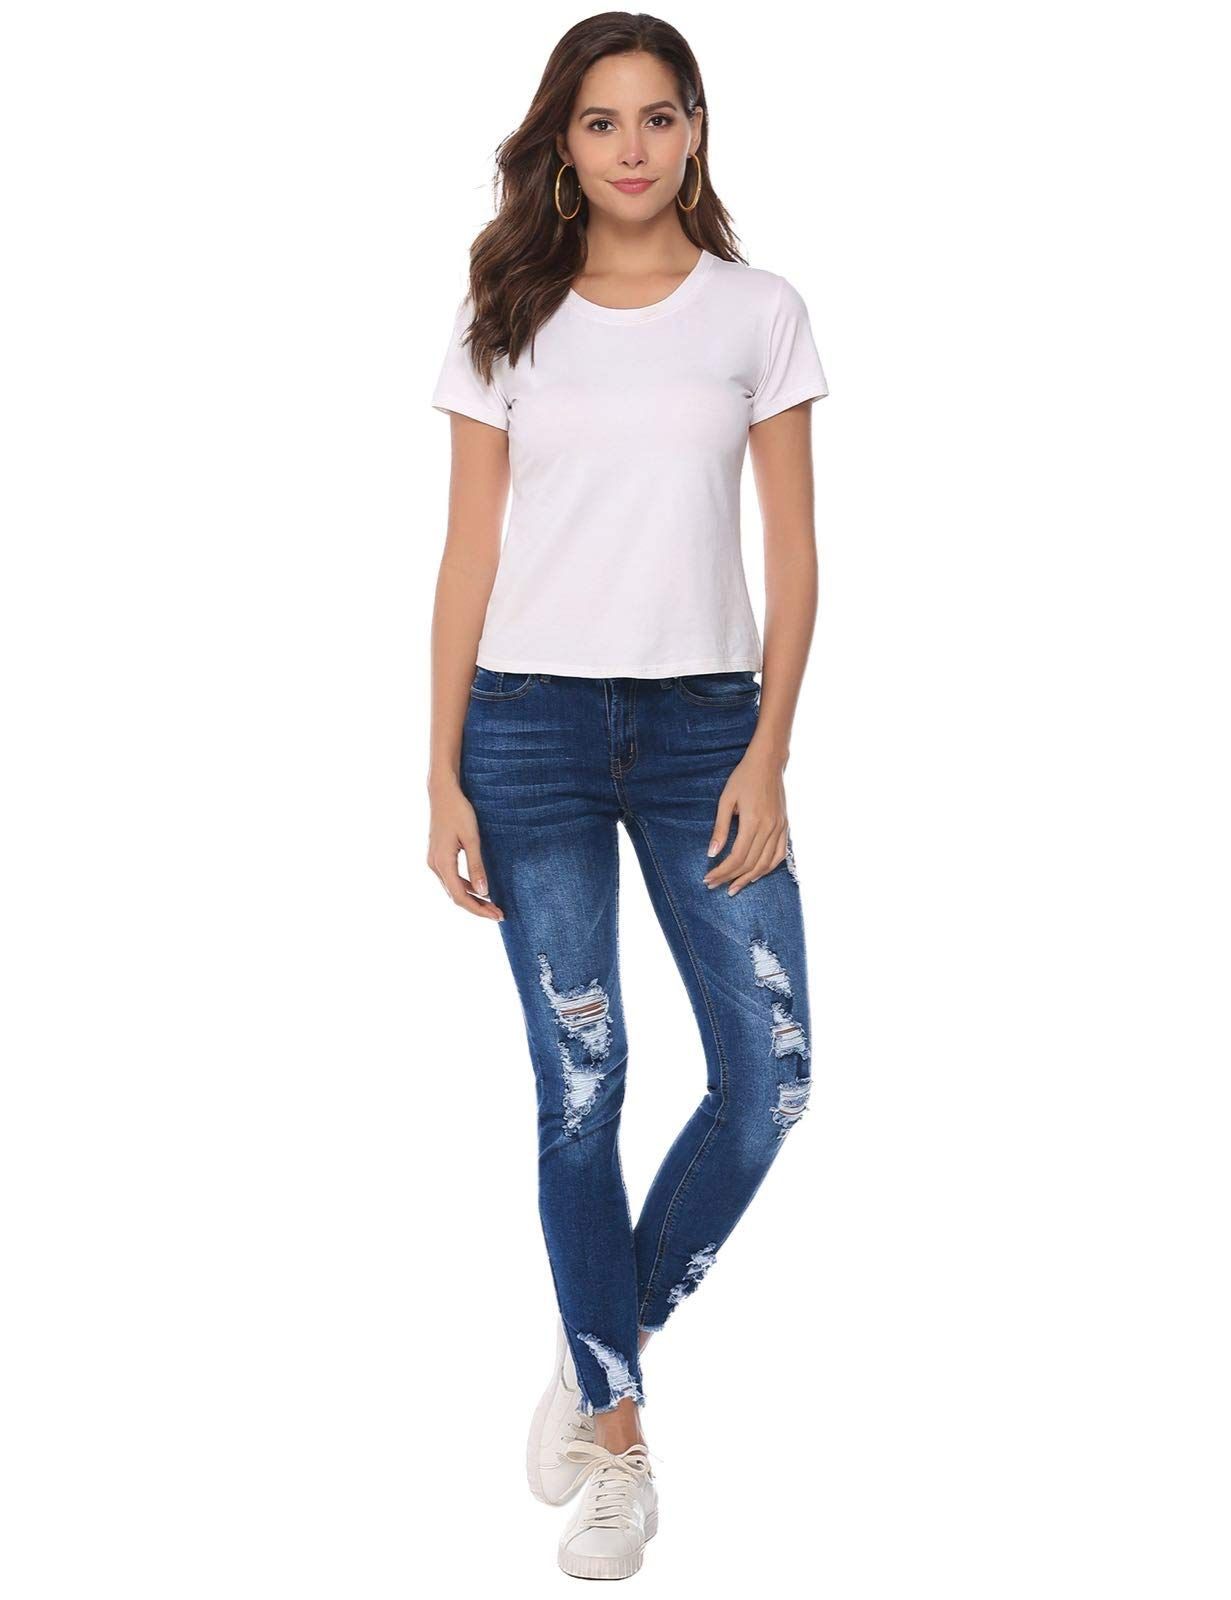 The 10 Best Jeans for Women of 2021 - ReviewThis